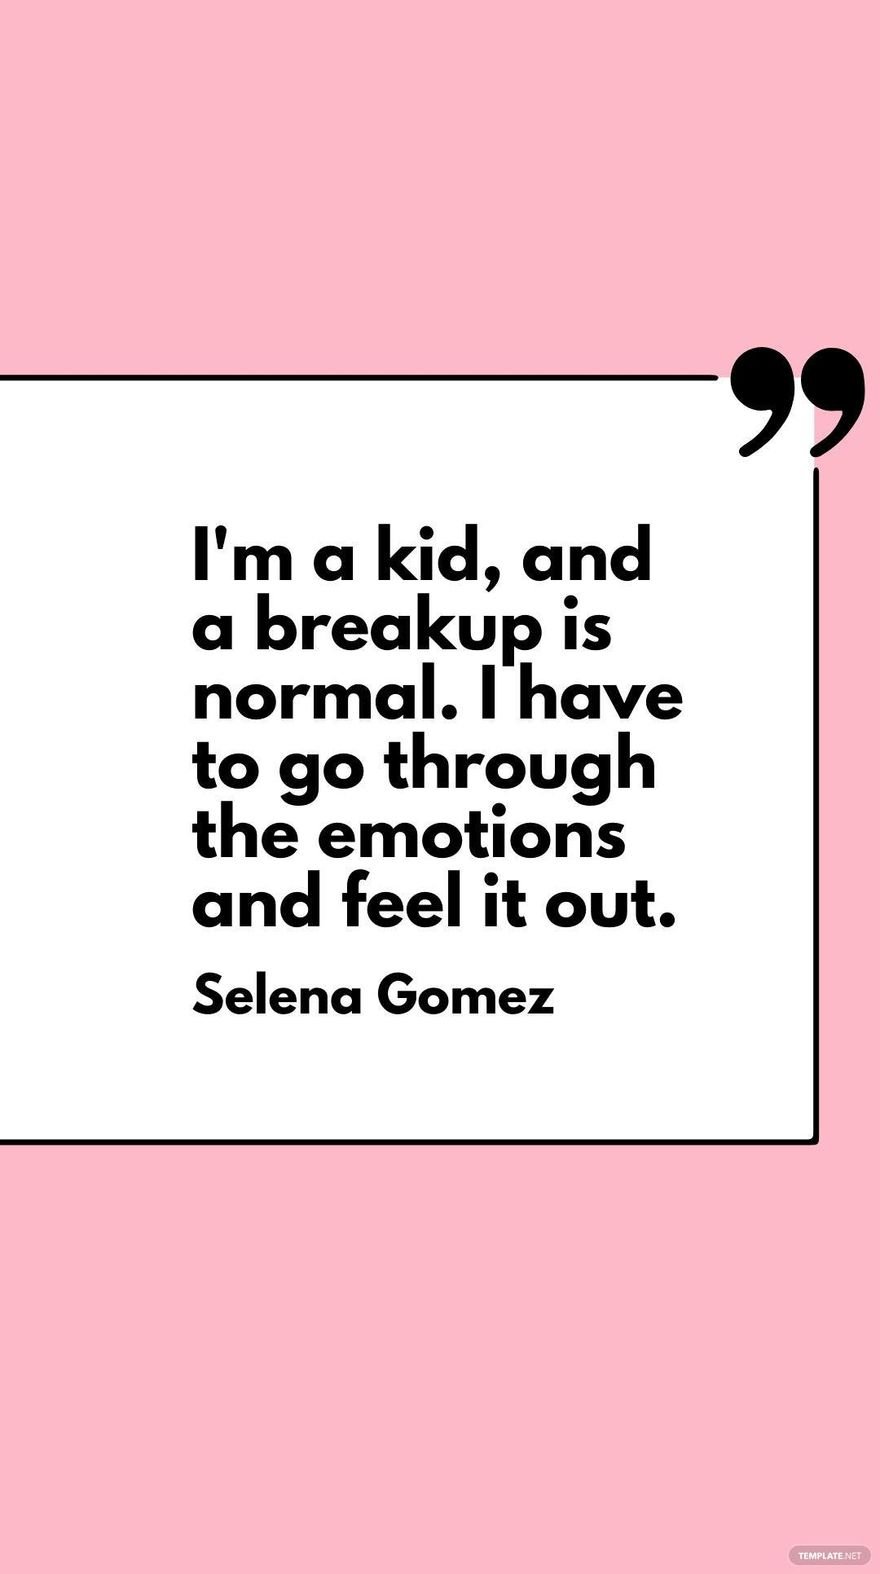 Selena Gomez - I'm a kid, and a breakup is normal. I have to go through the emotions and feel it out.